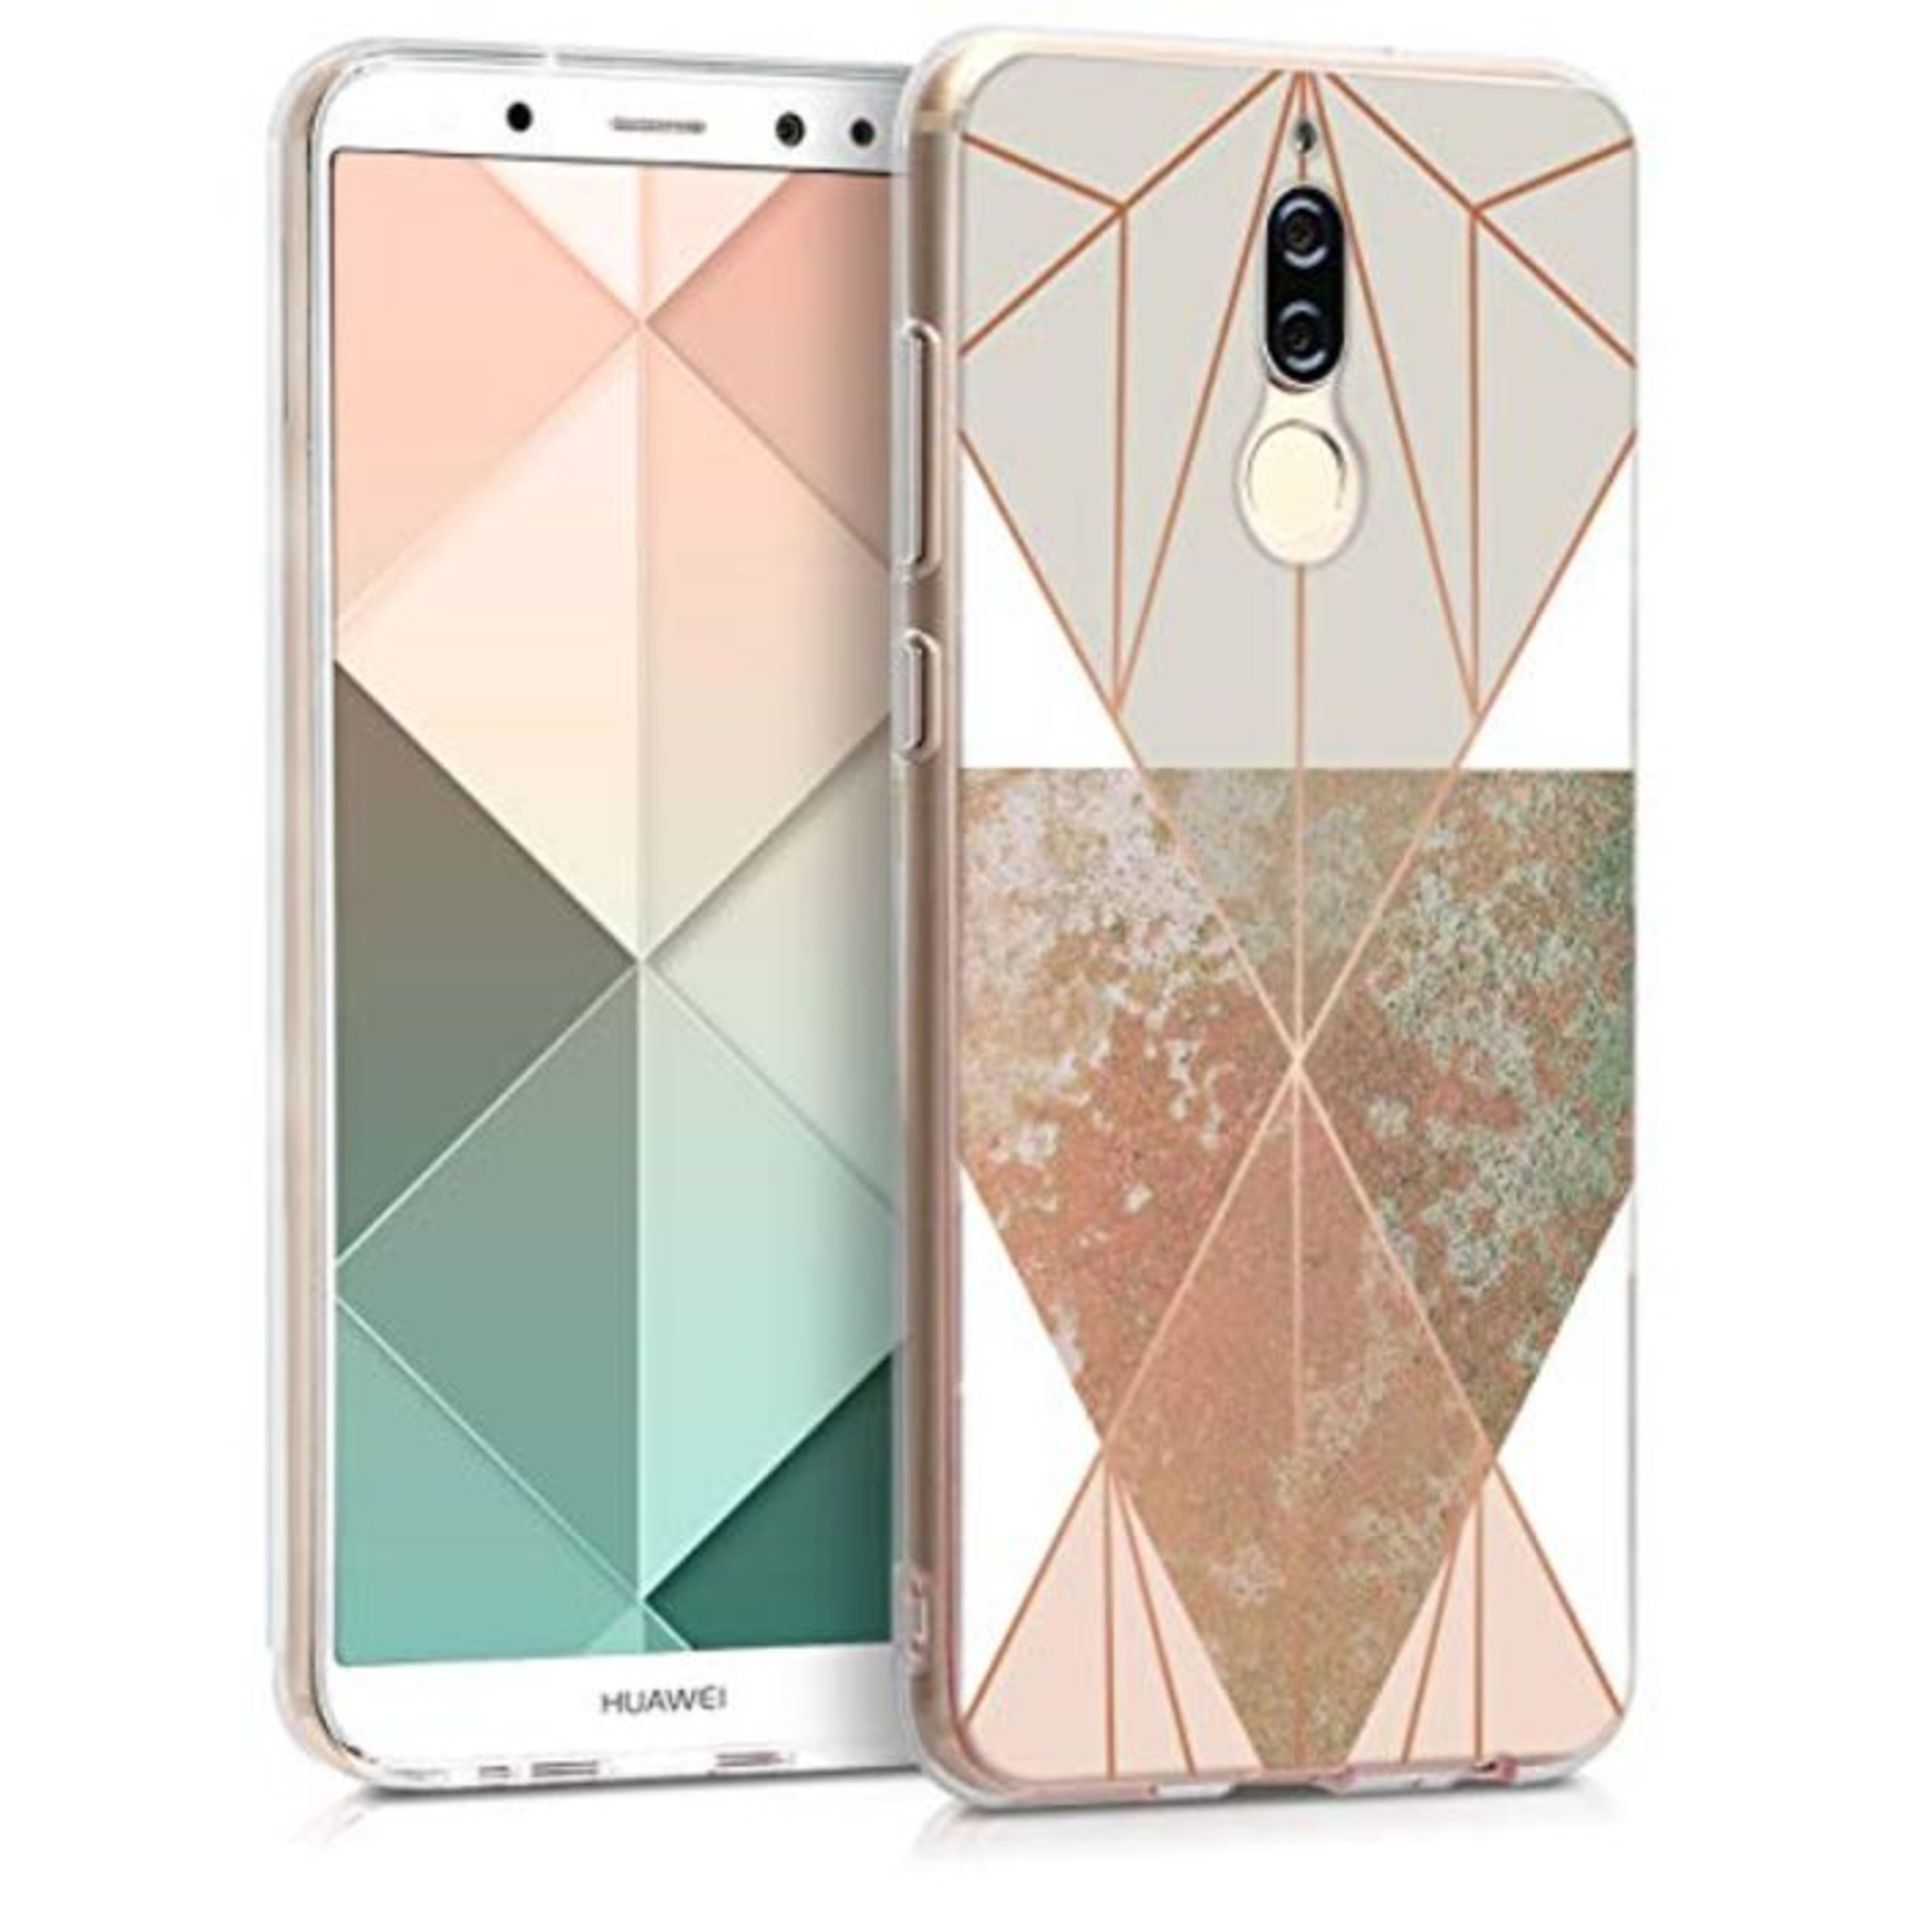 kwmobile Case Compatible with Huawei Mate 10 Lite - TPU Crystal Clear Back Protective